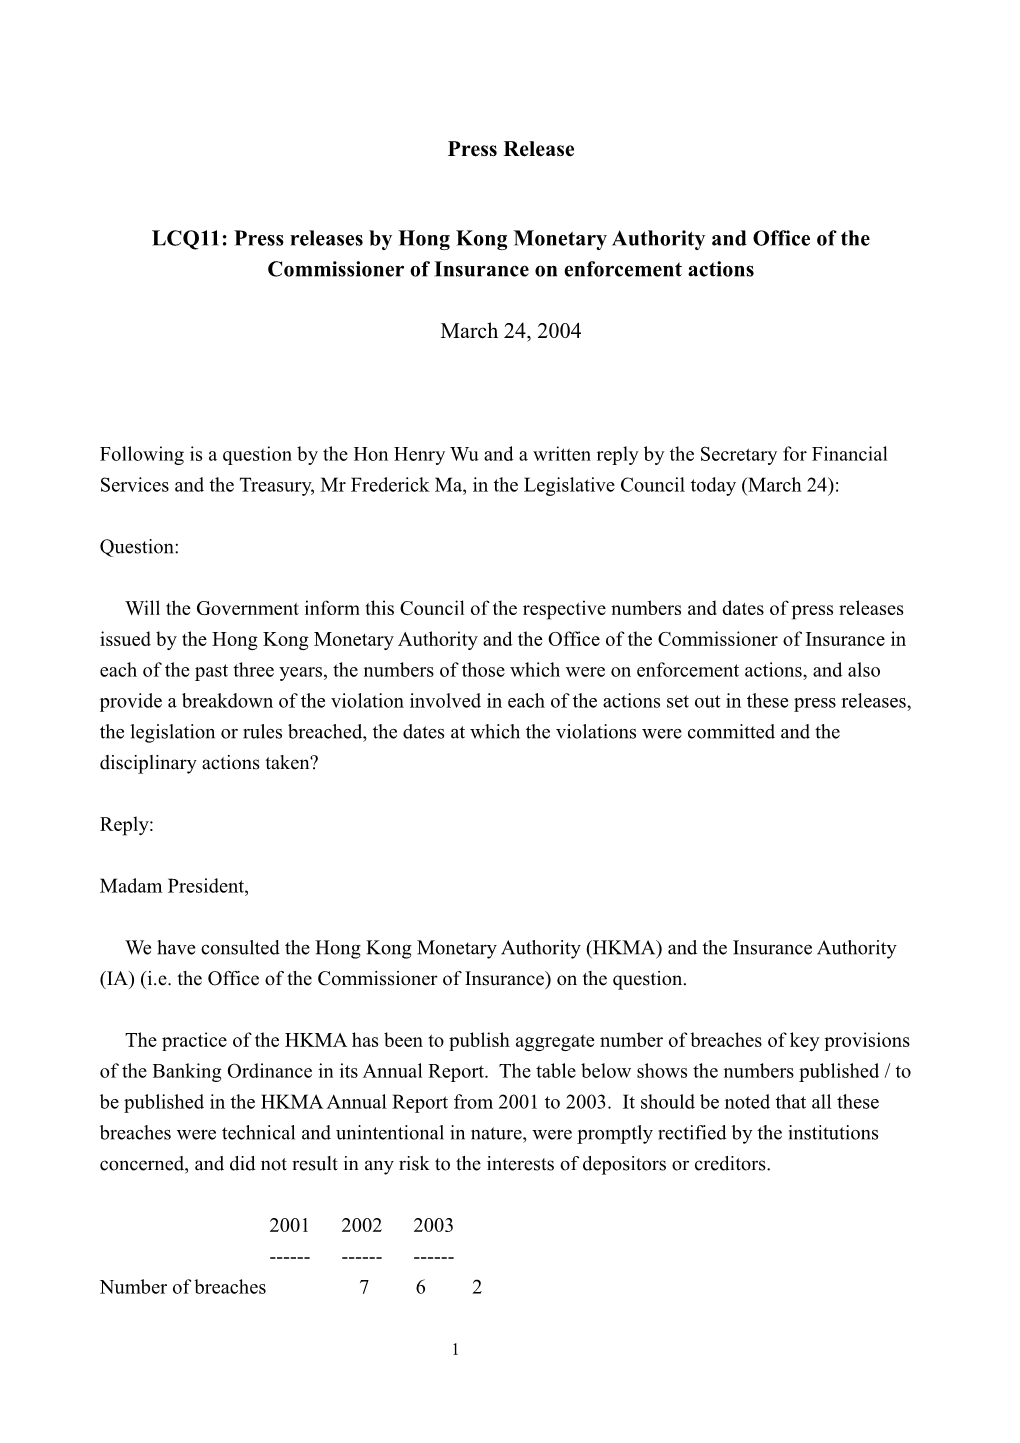 LCQ11: Press Releases by Hong Kong Monetary Authority and Office of the Commissioner Of